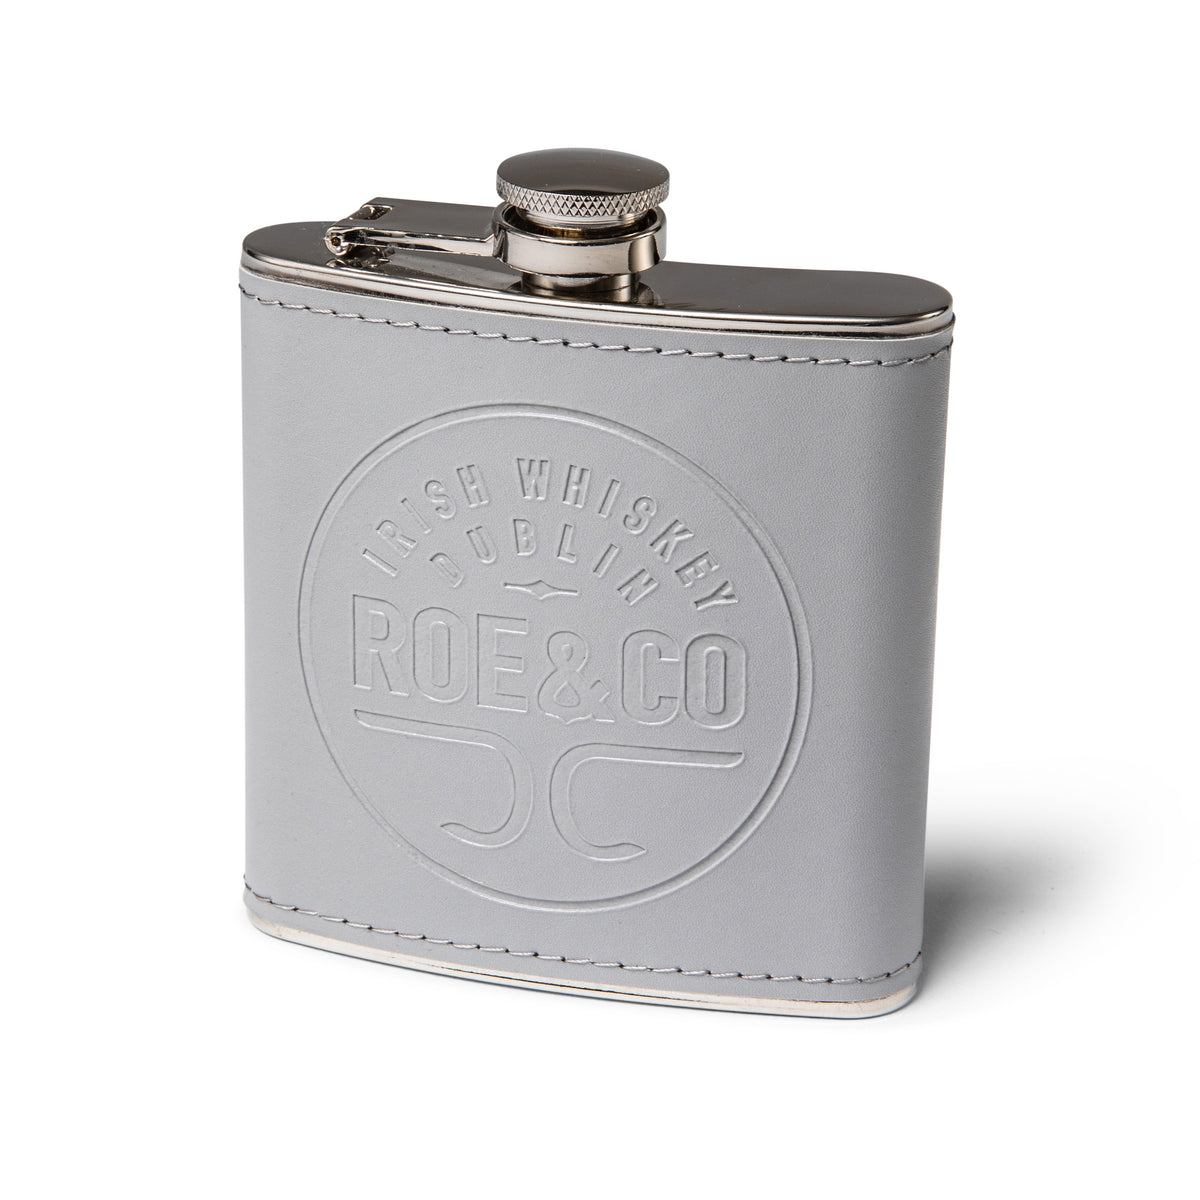 Roe & Co Whiskey Steel and Leather Hip Flask